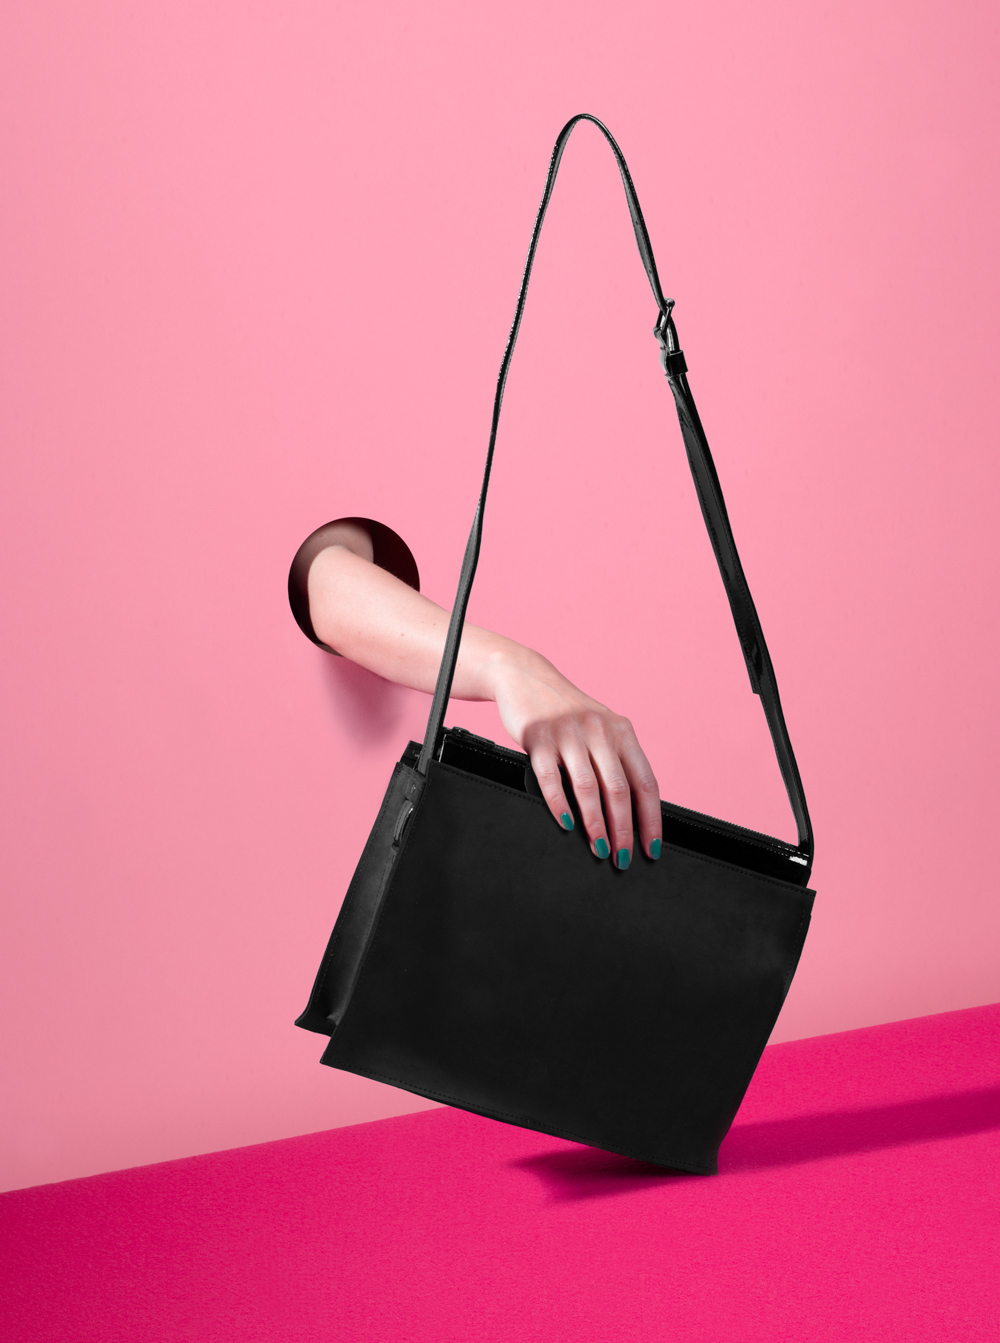 Adobe Portfolio bags product pink model abstract minimalistisch